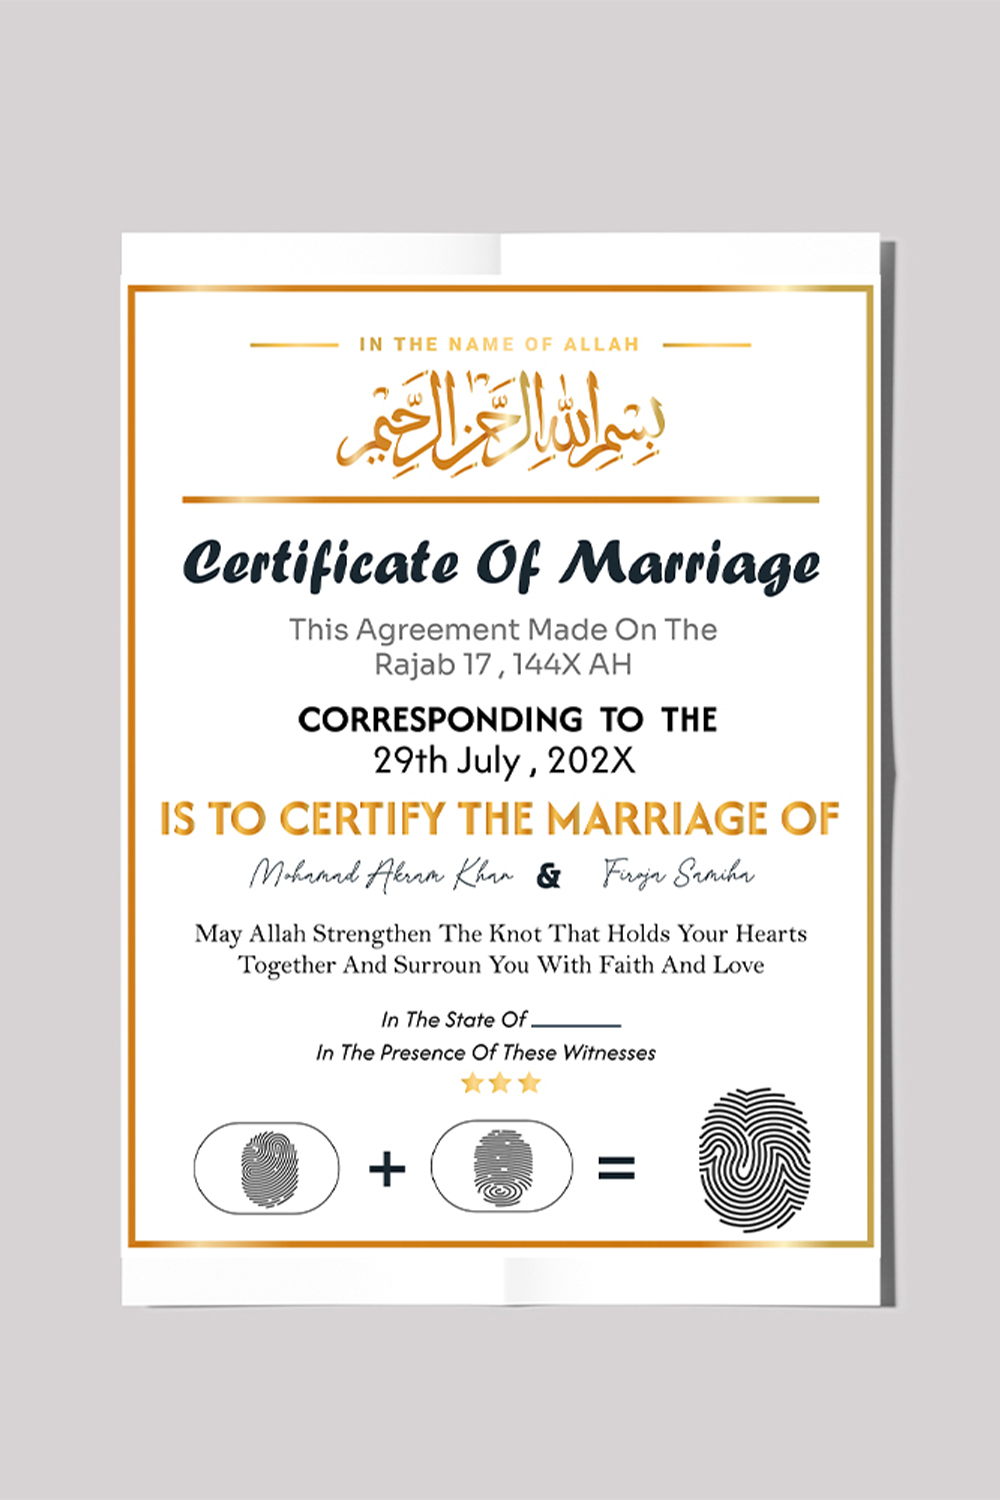 Certificate Of marriage for Islamic Verify pinterest preview image.